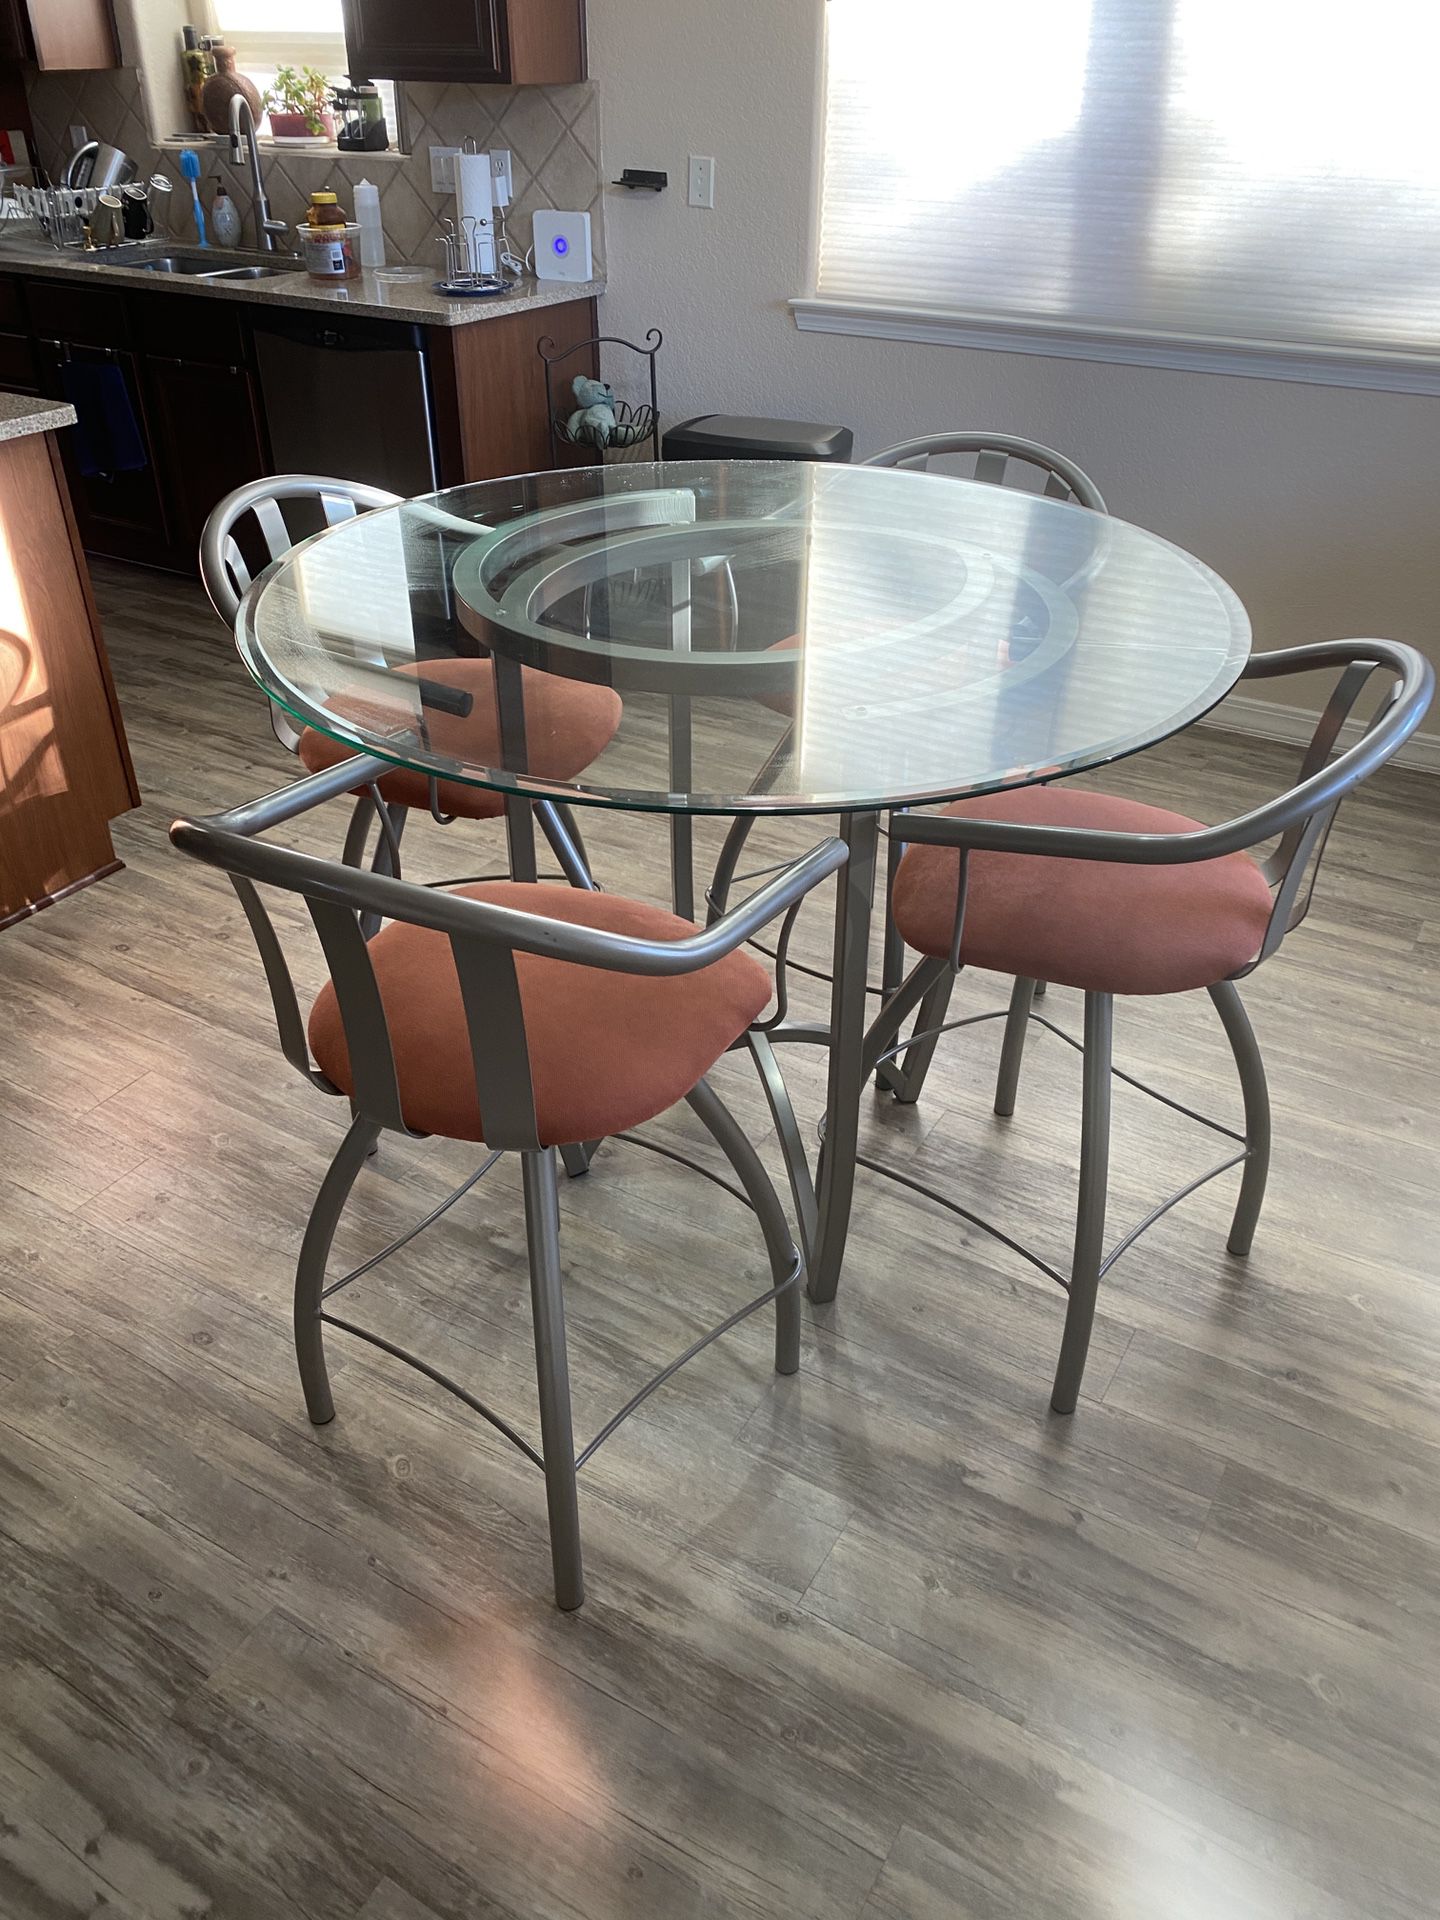 Breakfast Nook Counter Height Table With 4 Chairs